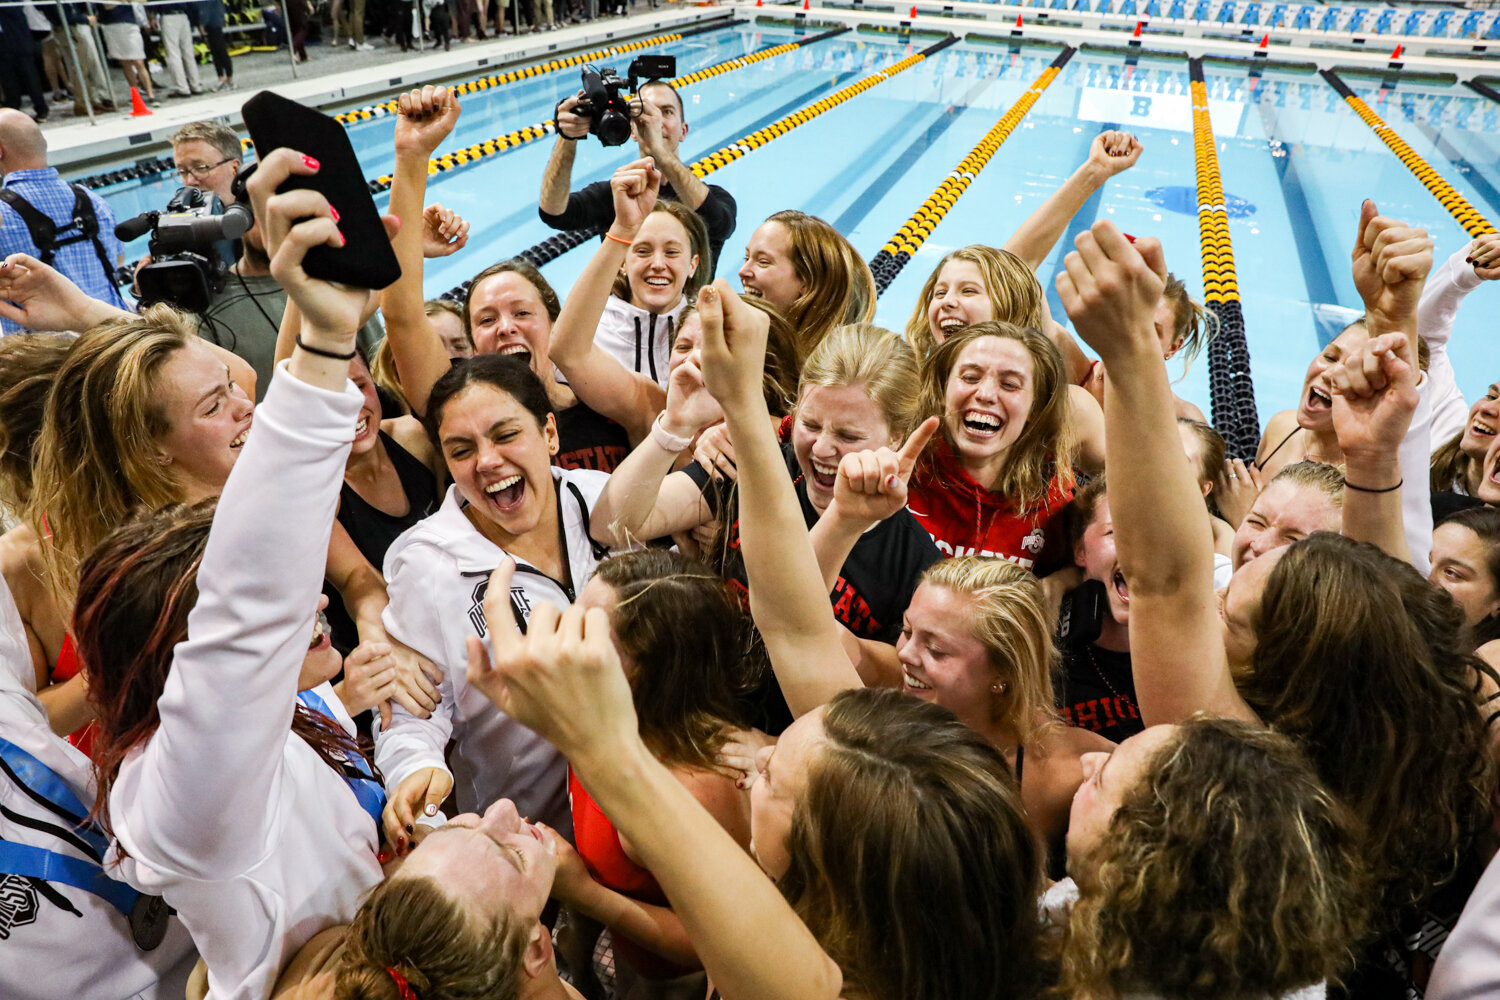  The Ohio State University Women’s Swimming and Diving Team celebrates winning the Big Ten Women’s Swimming and Diving Championships at the Campus Welfare and Recreation Center in Iowa City, IA on Saturday, Feb. 22, 2020.  